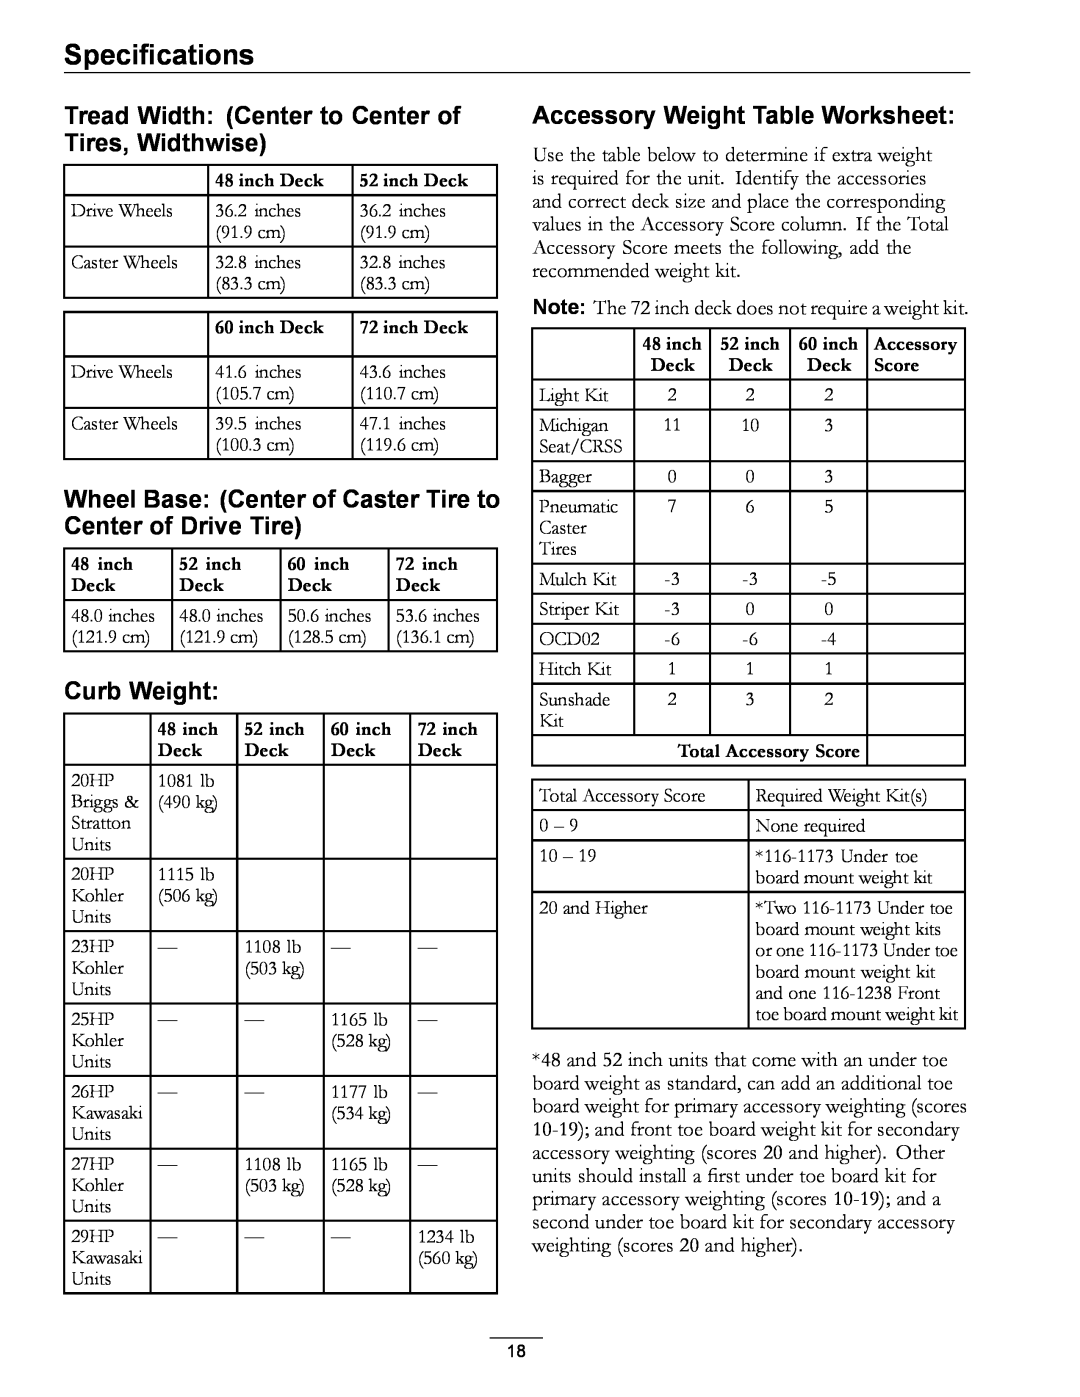 Exmark 000 & higher manual Tread Width Center to Center of Tires, Widthwise, Curb Weight, Accessory Weight Table Worksheet 